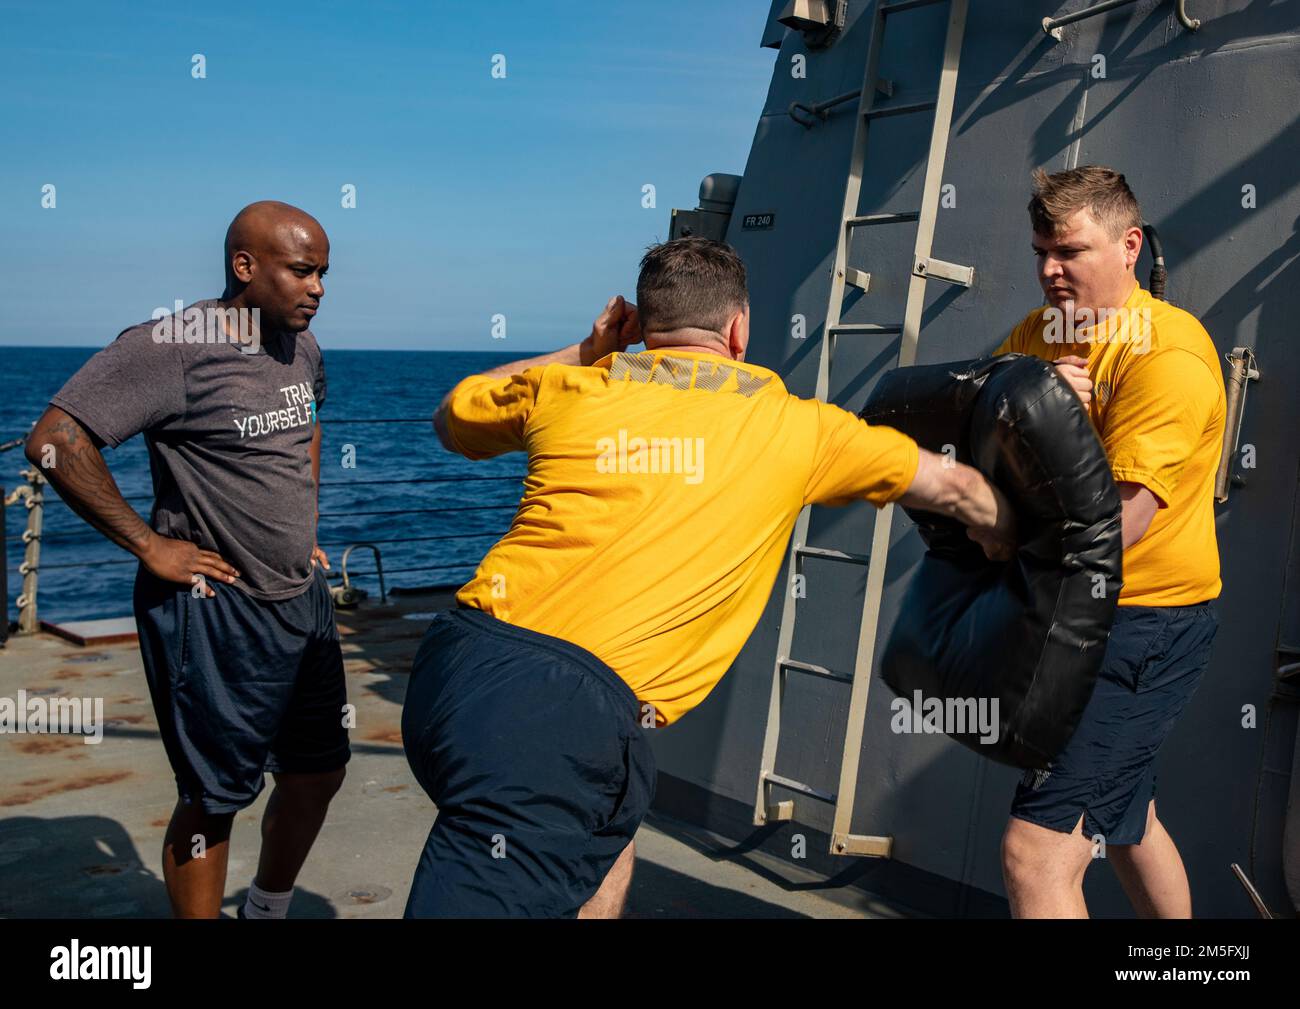 SOUTH CHINA SEA (March 15, 2022) Sailors participate in non-lethal weapons training aboard the Arleigh Burke-class guided-missile destroyer USS Ralph Johnson (DDG 114). Ralph Johnson is assigned to Task Force 71/Destroyer Squadron (DESRON) 15, the Navy’s largest forward-deployed DESRON and the U.S. 7th fleet’s principal surface force. Stock Photo